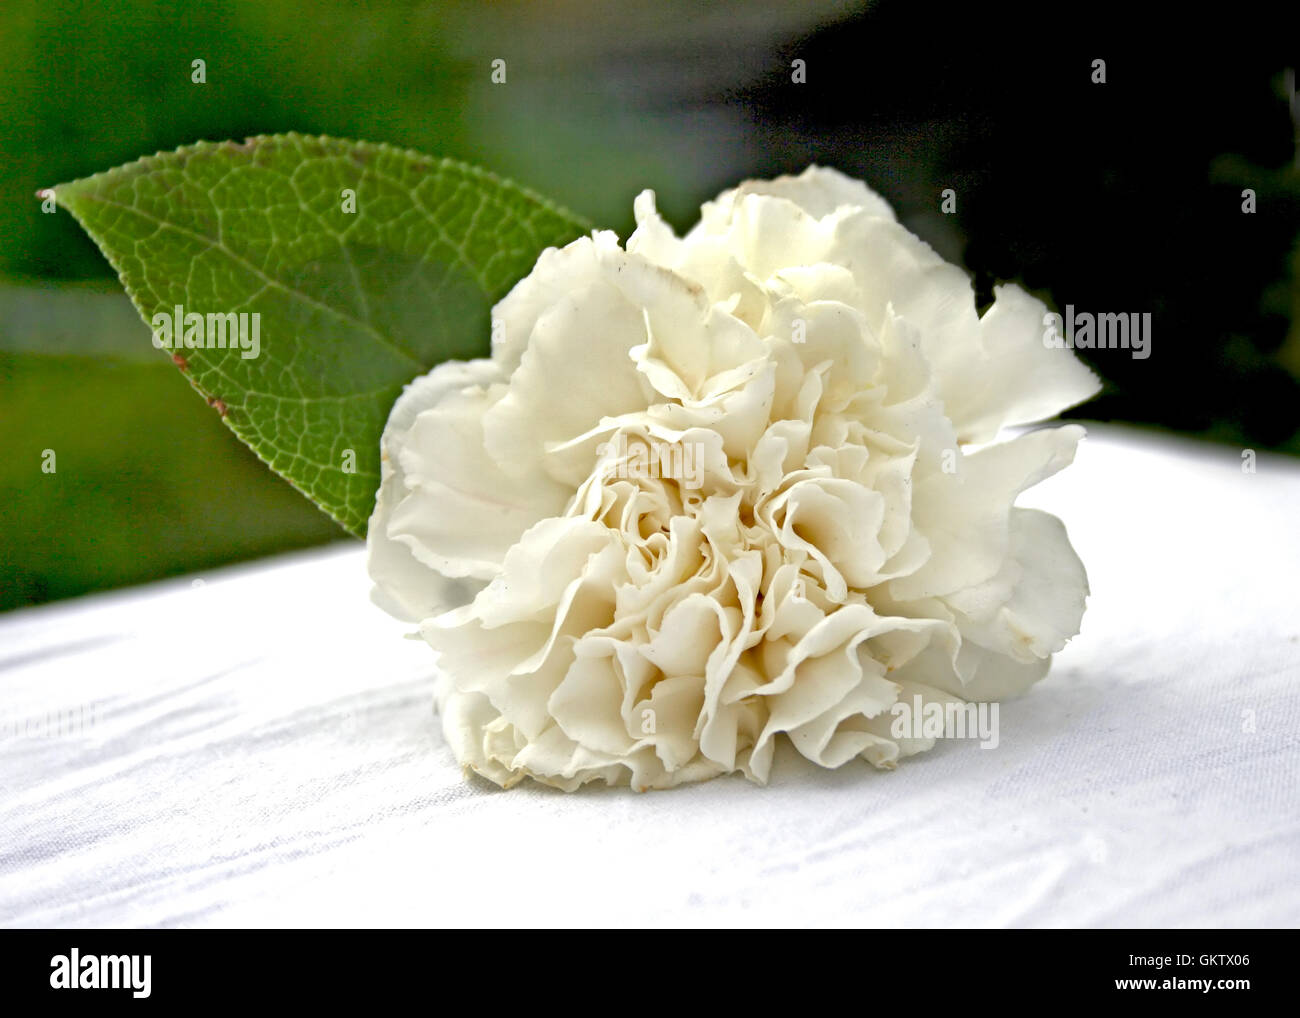 A flower for a corsage sitting on a table Stock Photo